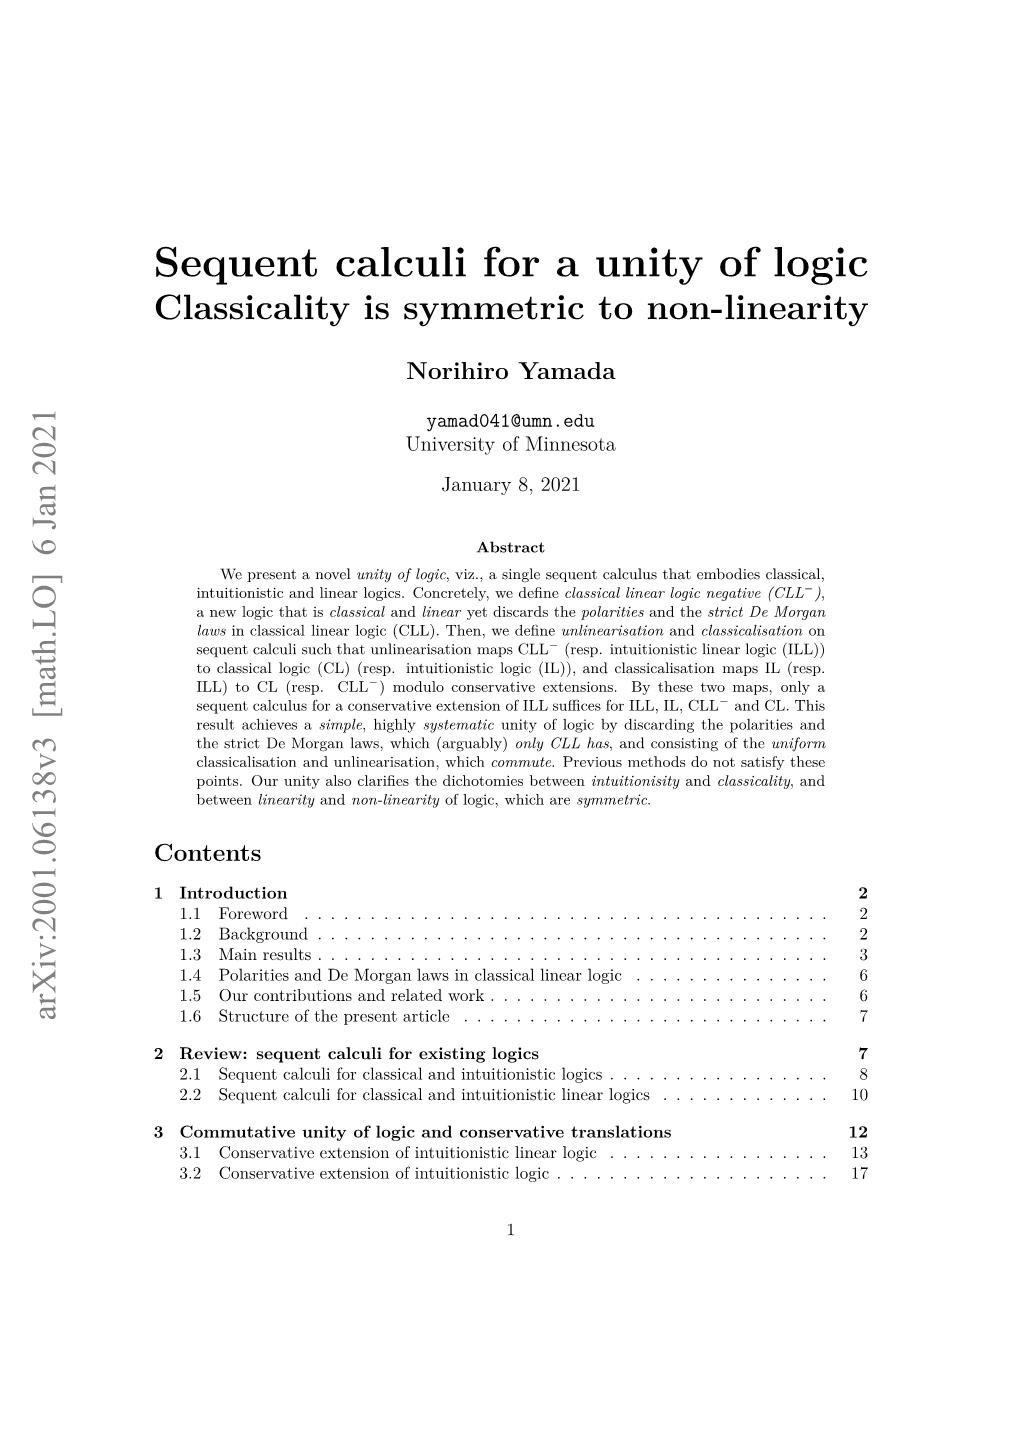 Sequent Calculi for a Unity of Logic